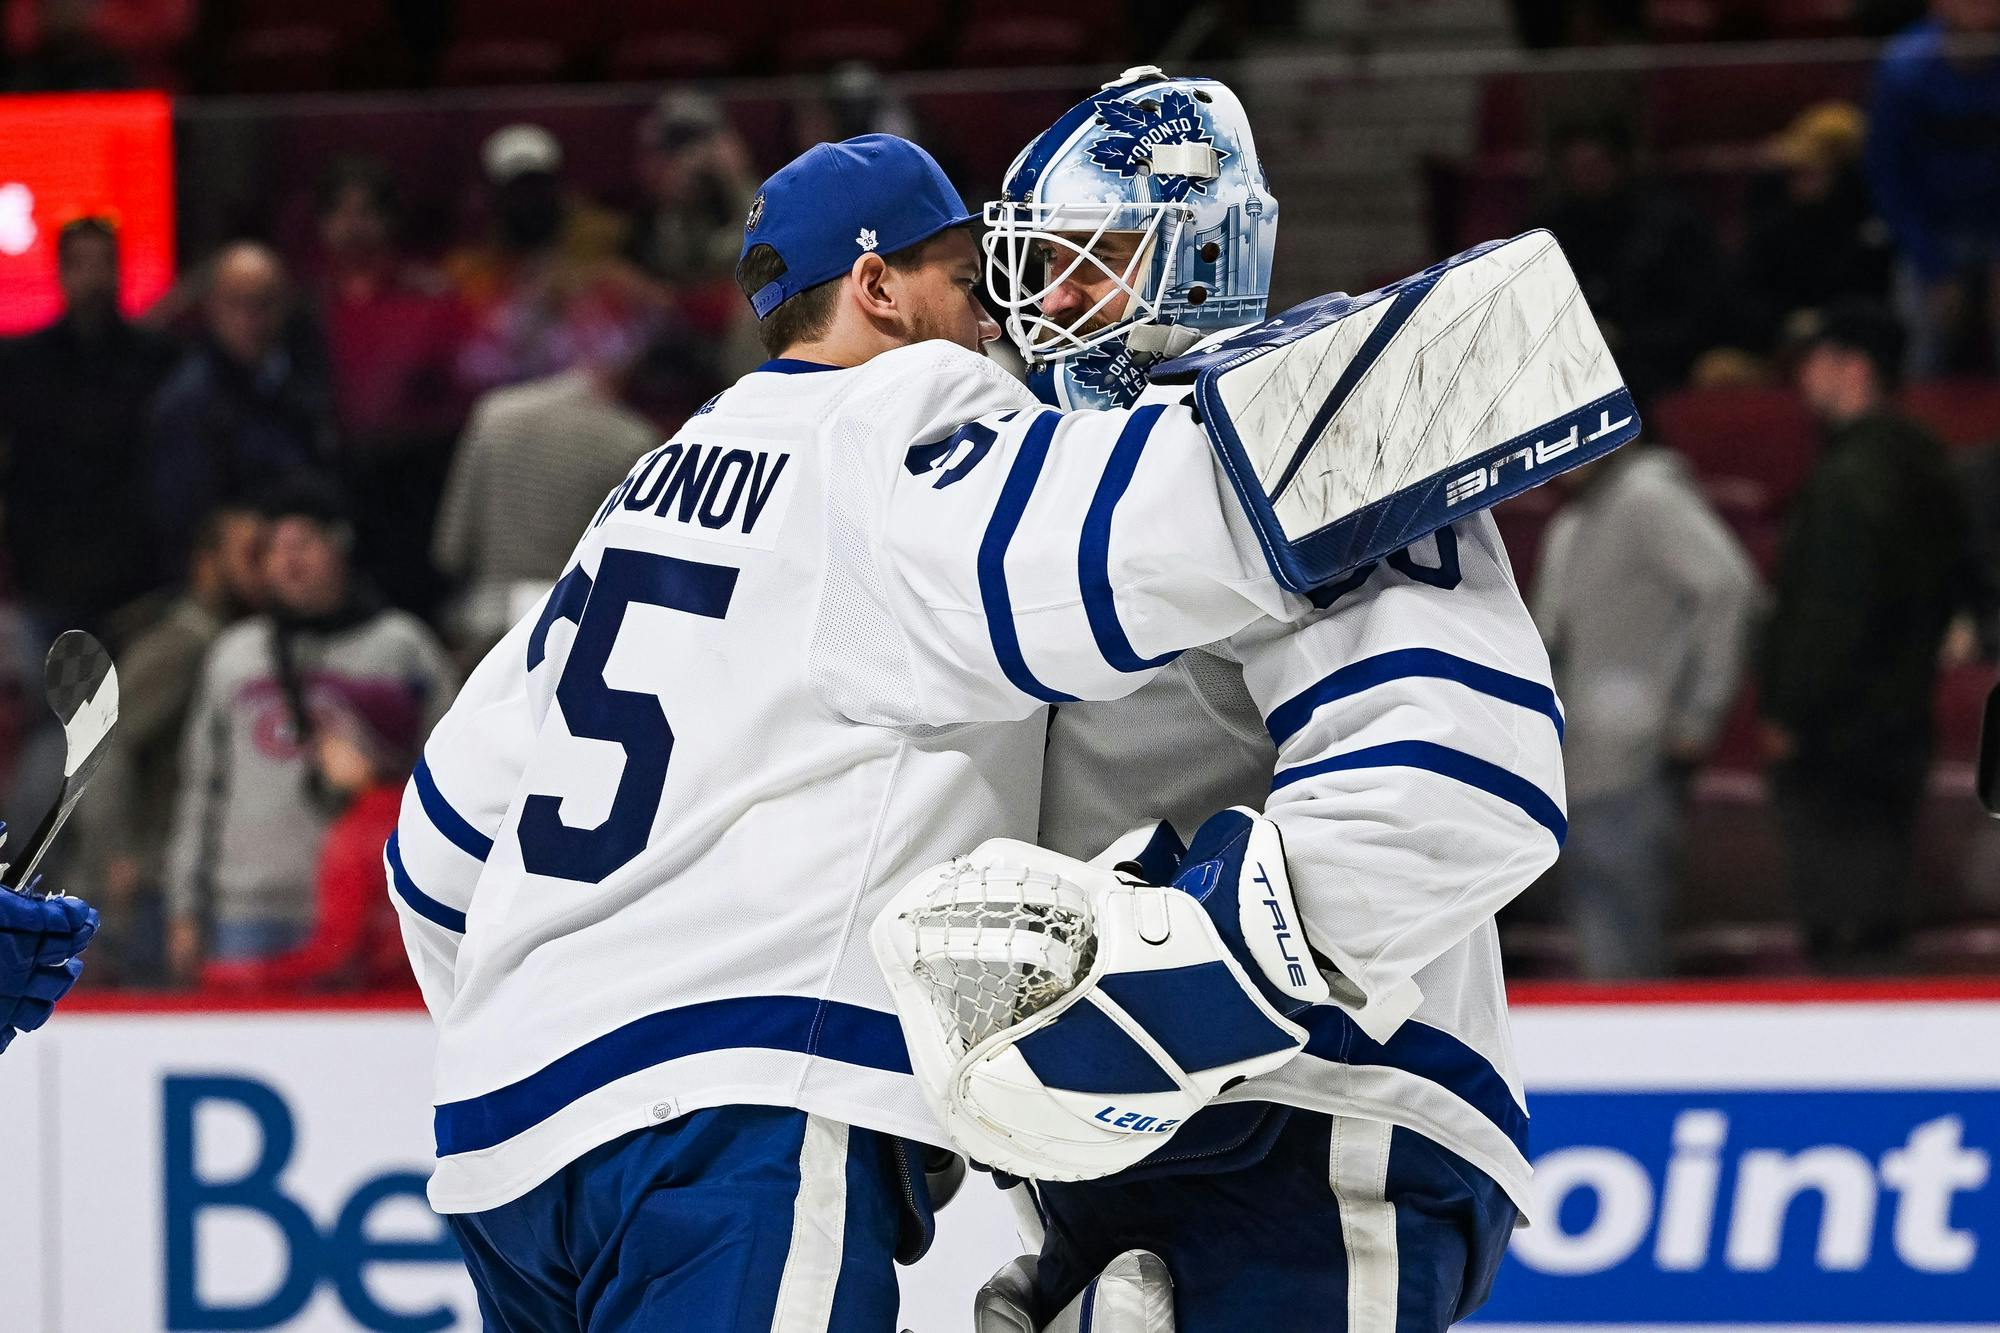 Maple Leafs goalie Murray exits with injury in loss to Red Wings